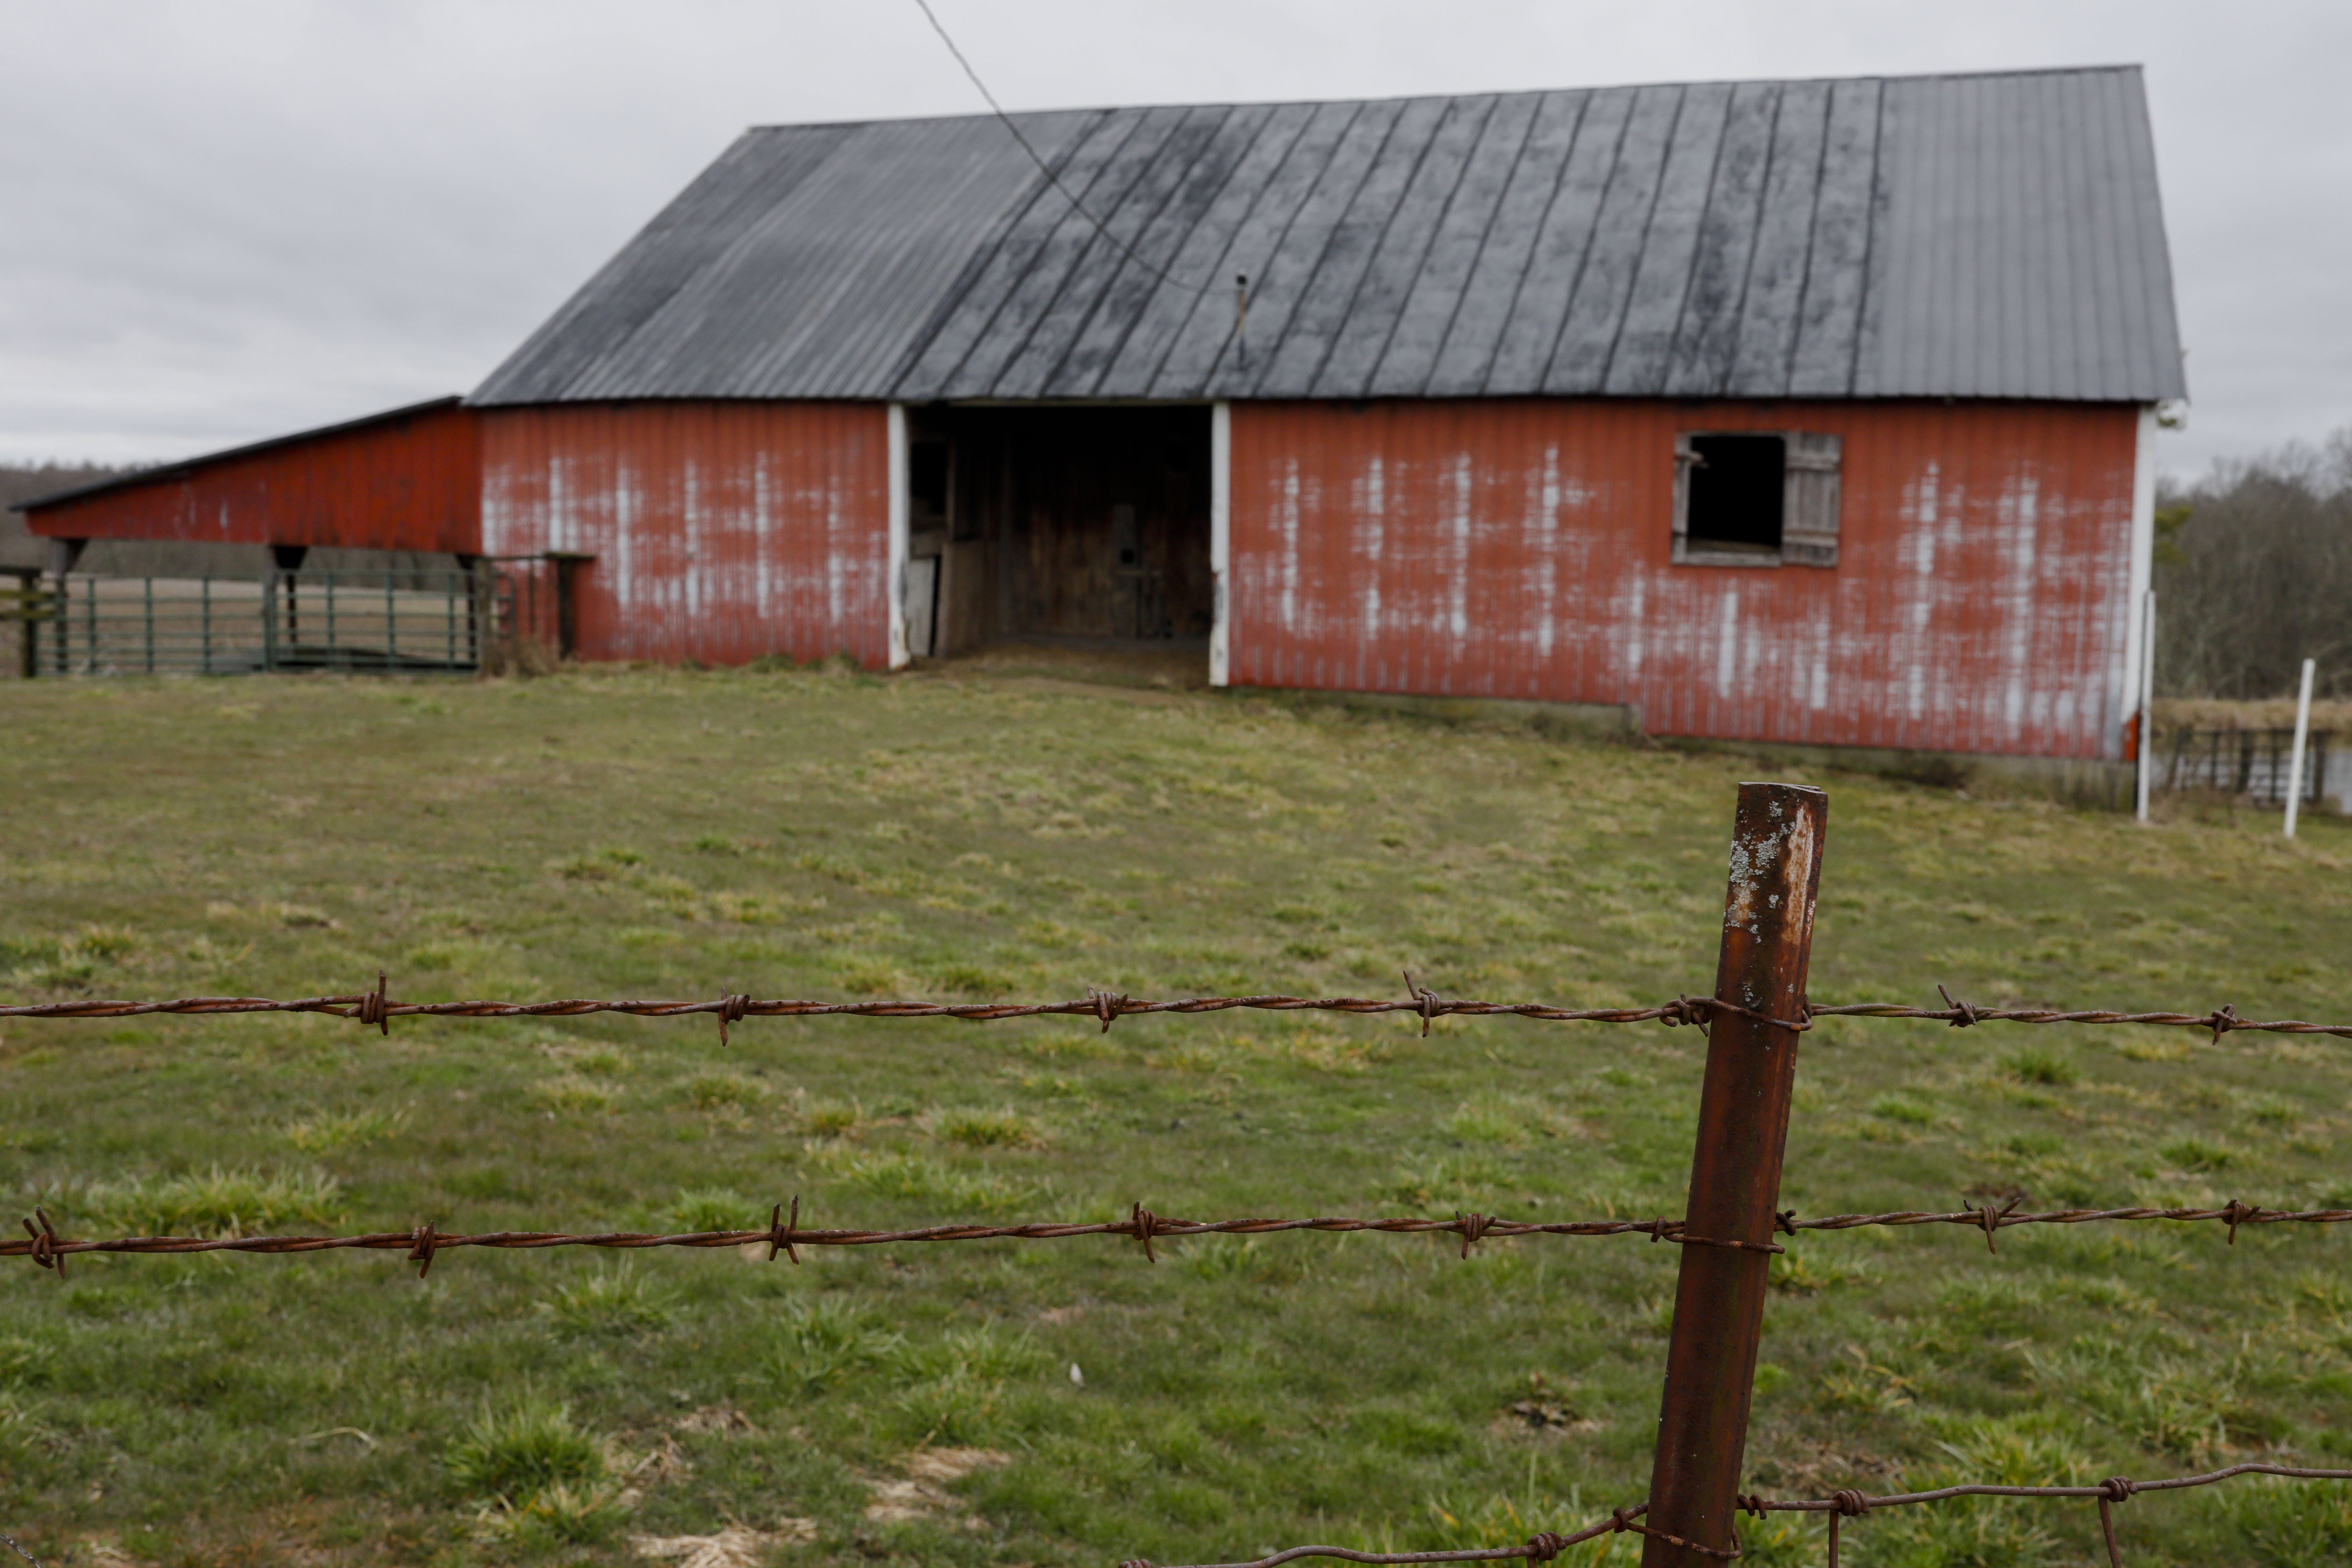 A barbed wire fence surrounds an old barn where Charlie Utter's cousin once kept angus cattle on Tuesday, March 3, 2020 in Georgetown, Ohio. His cousin died by suicide in July 2017 and Charlie was left to handle his affairs after his death. [Joshua A. Bickel/Dispatch]